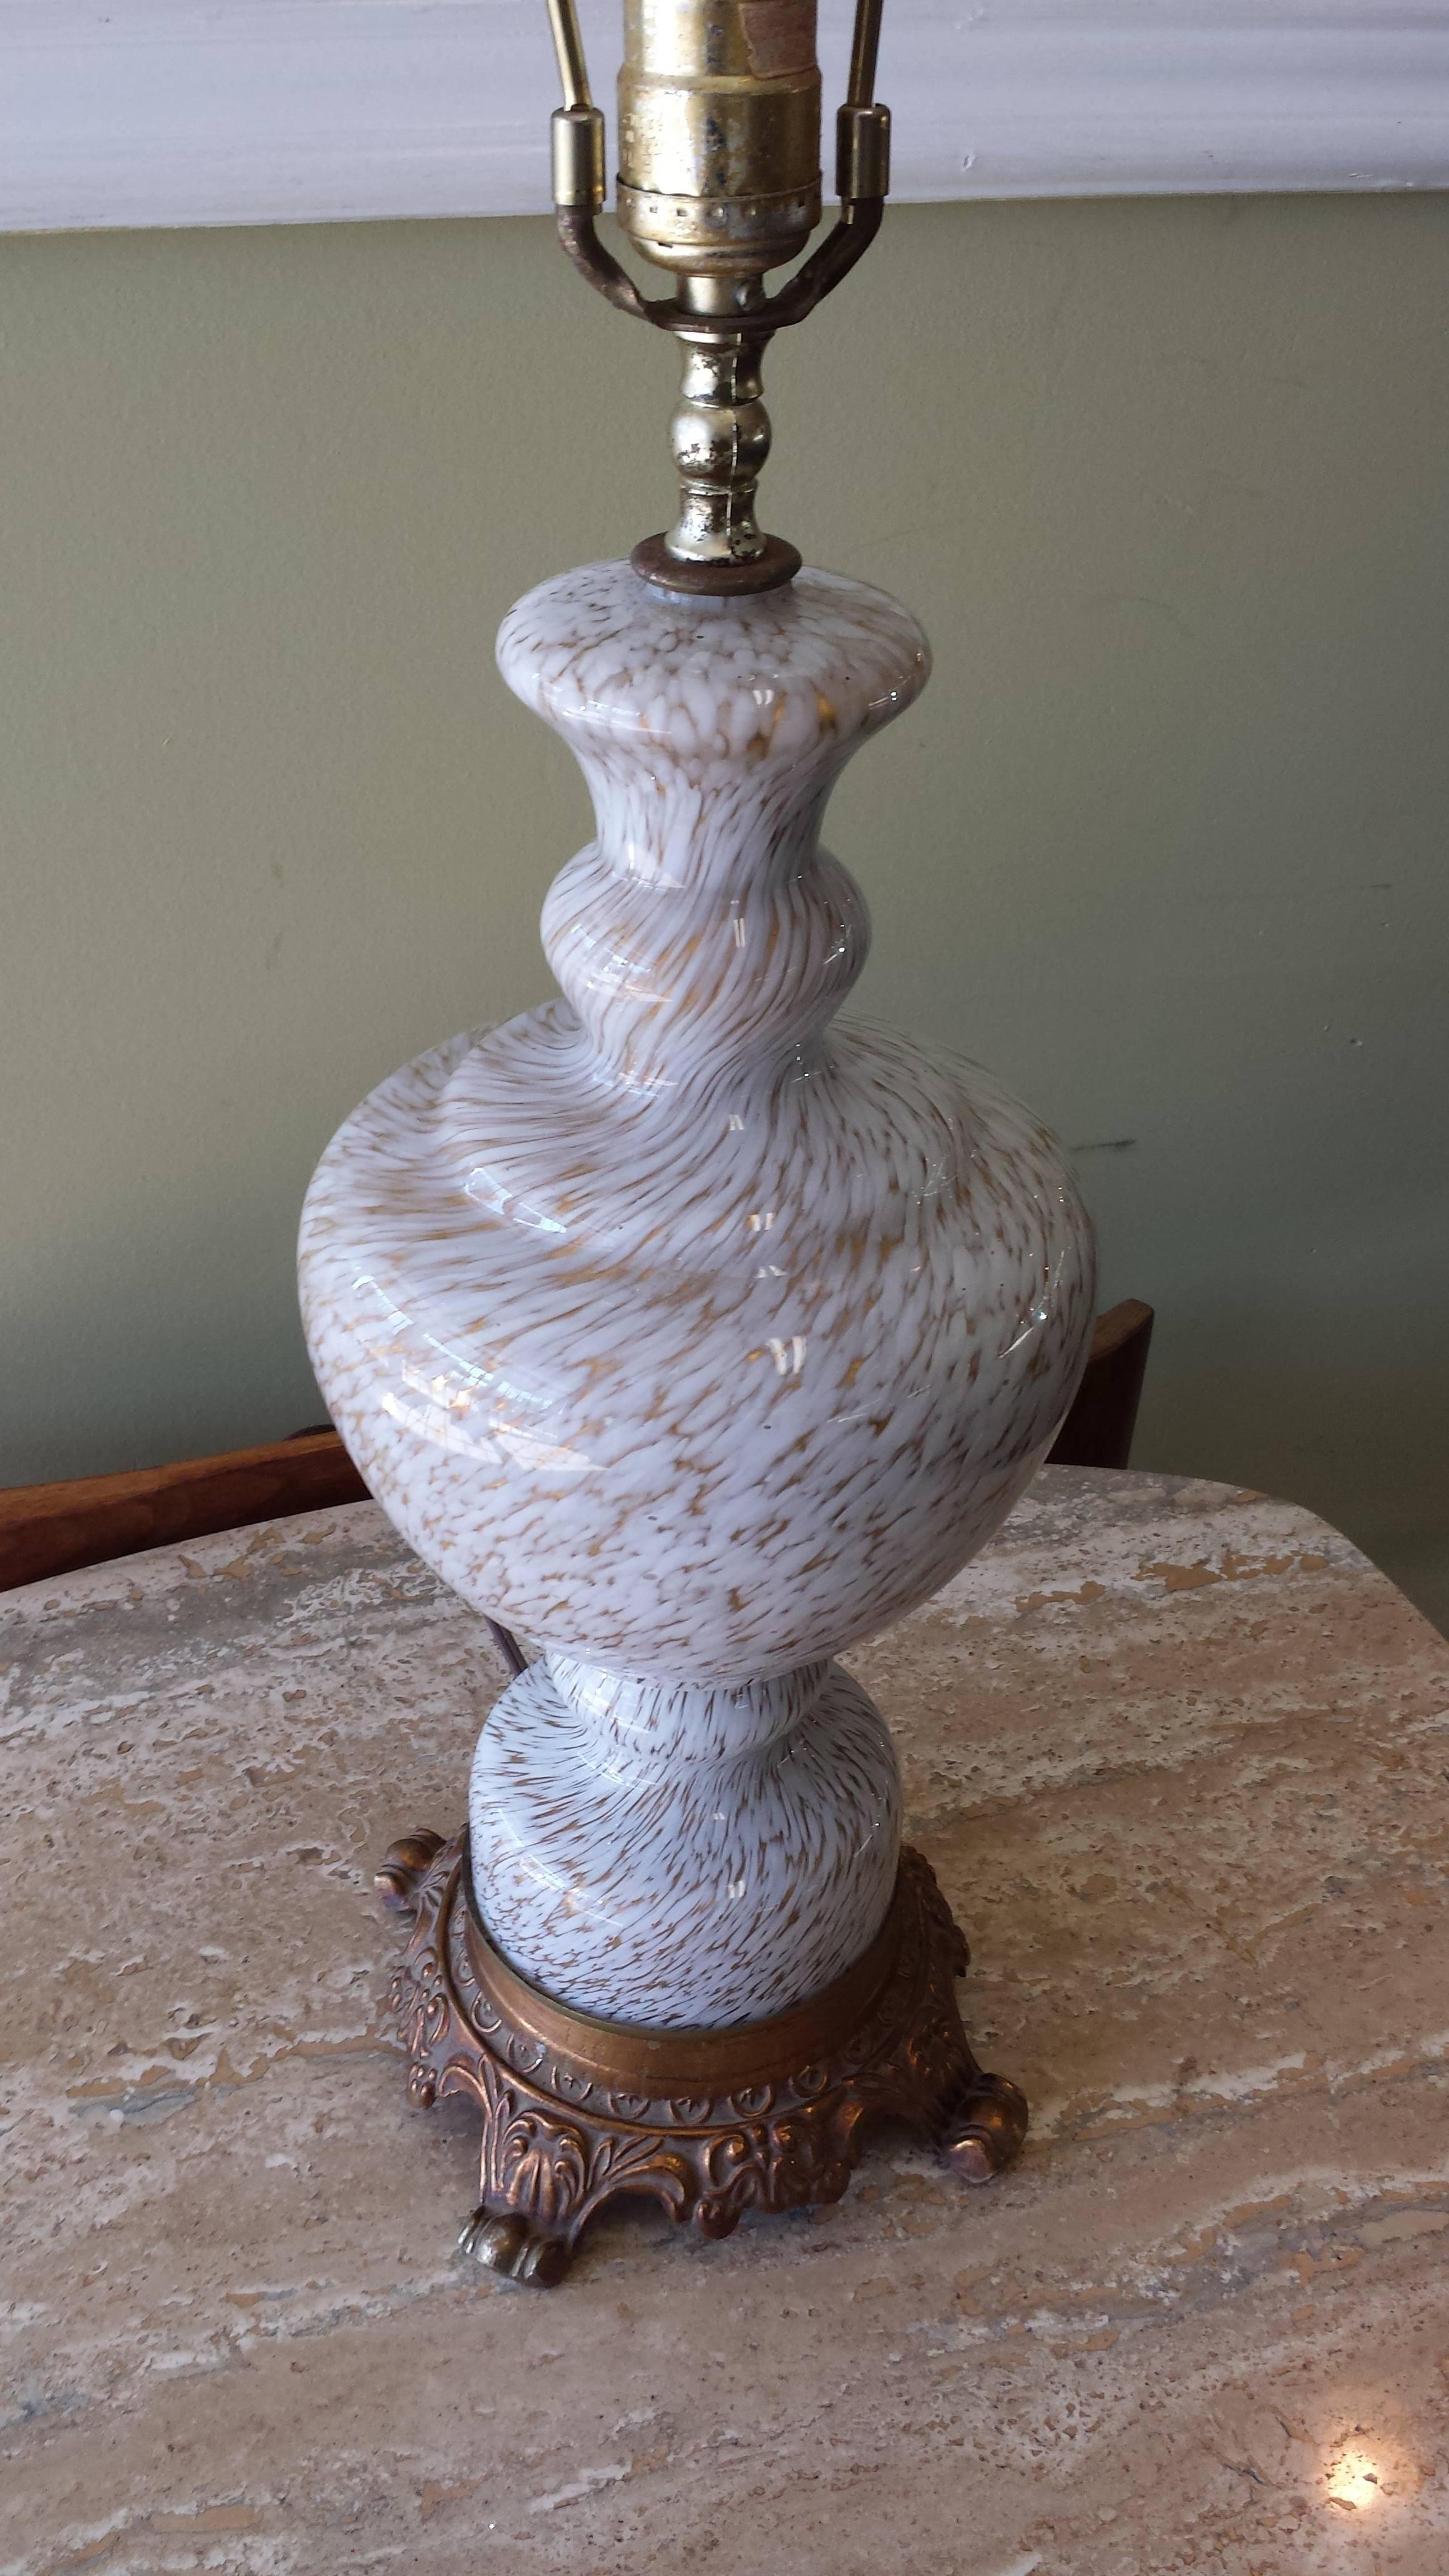 Murano gold and white swirl glass table lamp, in a vase form, and mounted on a metal base. The lamp measures 21" inches to top op socket x 7" inches in diameter, circa 1950's.